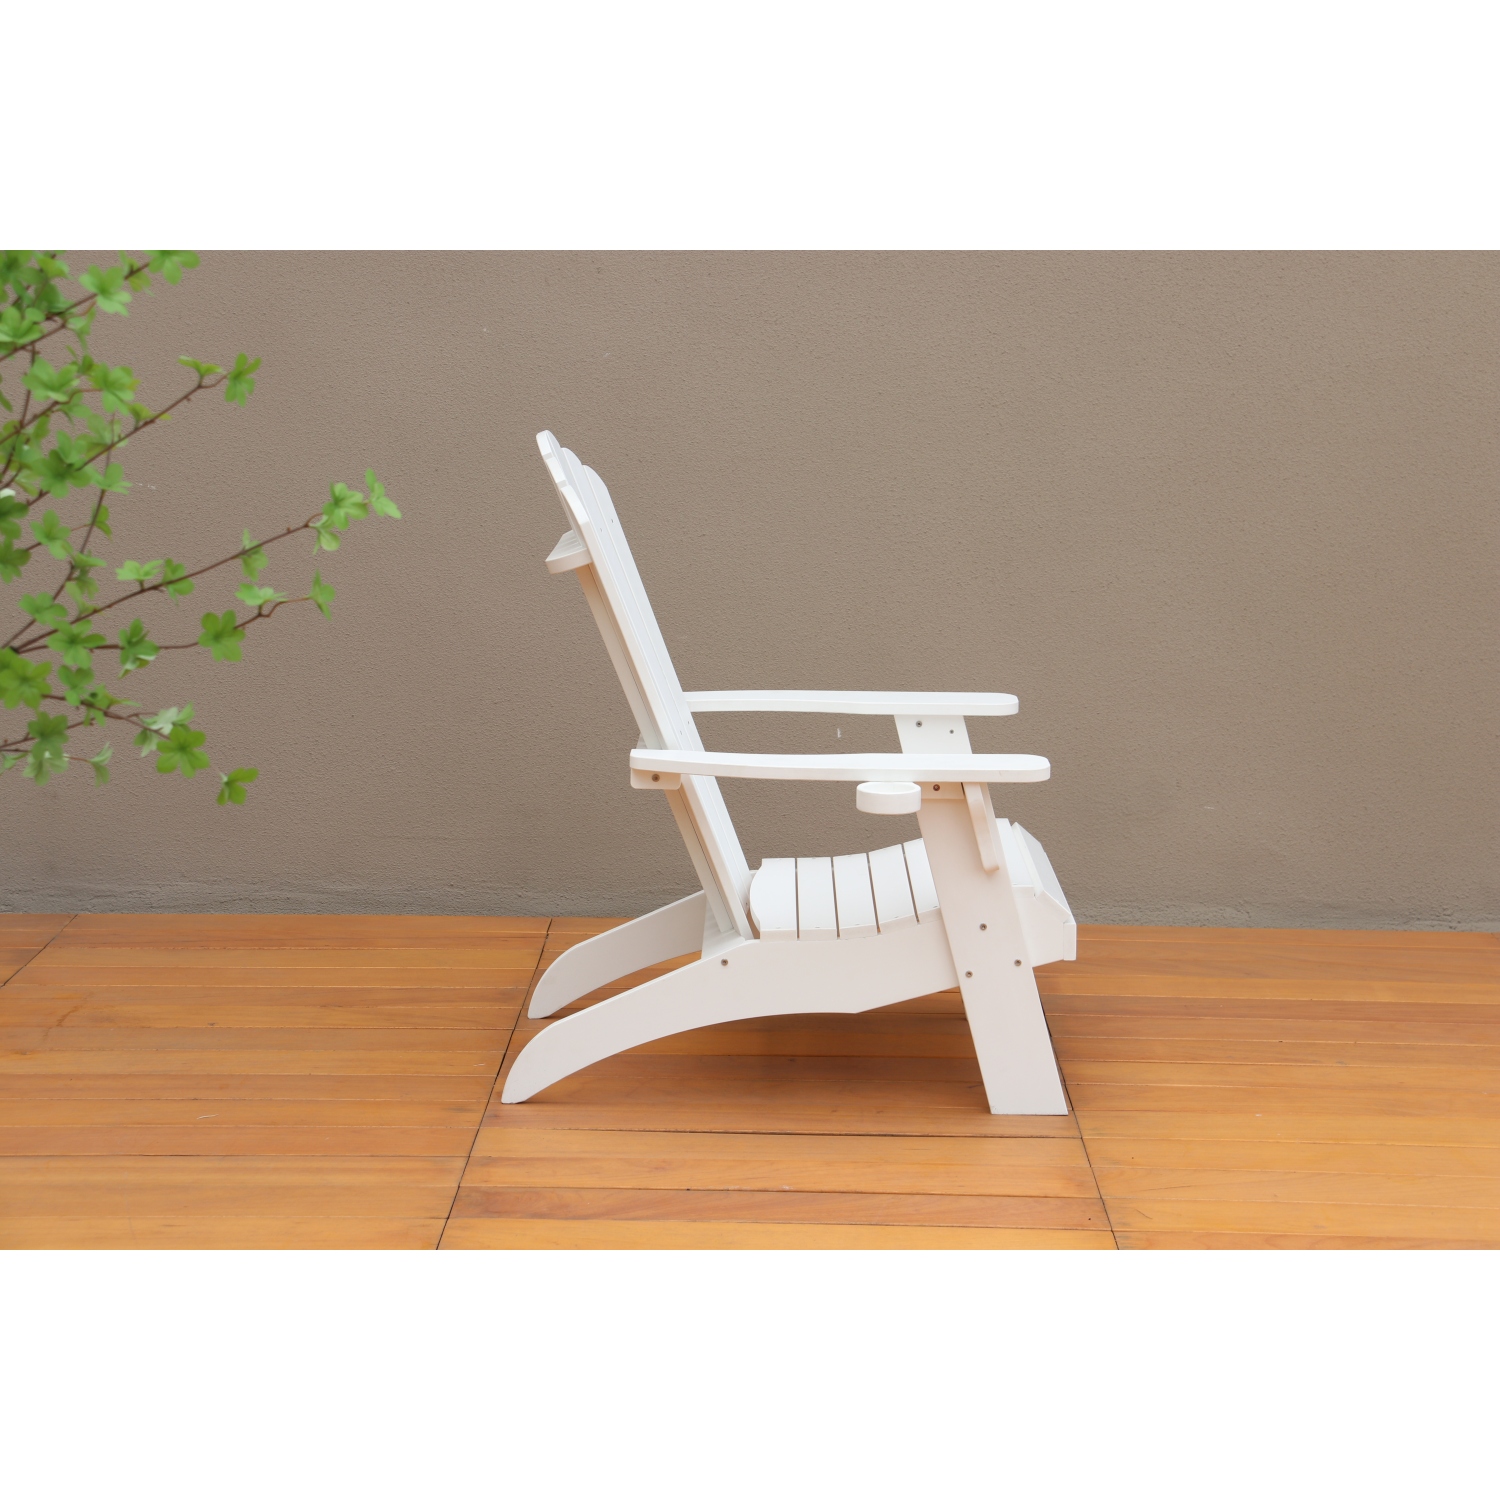 SUGIFT Adirondack Chair Backyard Outdoor Furniture,Patio Seating with Cup Holder,Fade-Resistant Plastic Wood for Lawn Patio Deck Garden Porch Lawn Furniture Chair,White - image 3 of 8